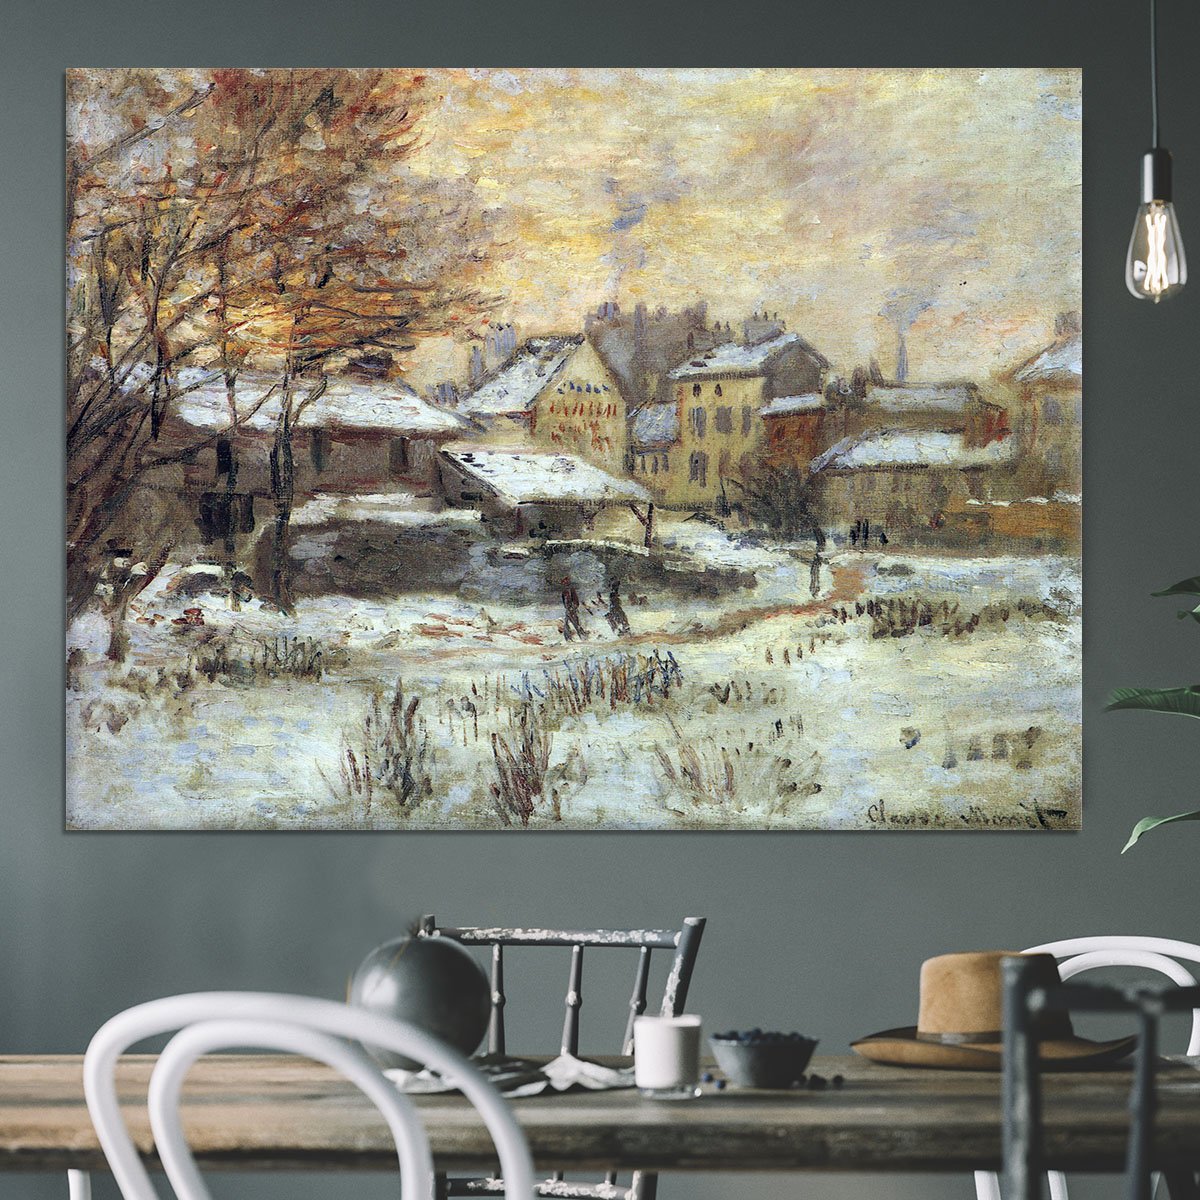 Snow at sunset Argenteuil in the snow by Monet Canvas Print or Poster